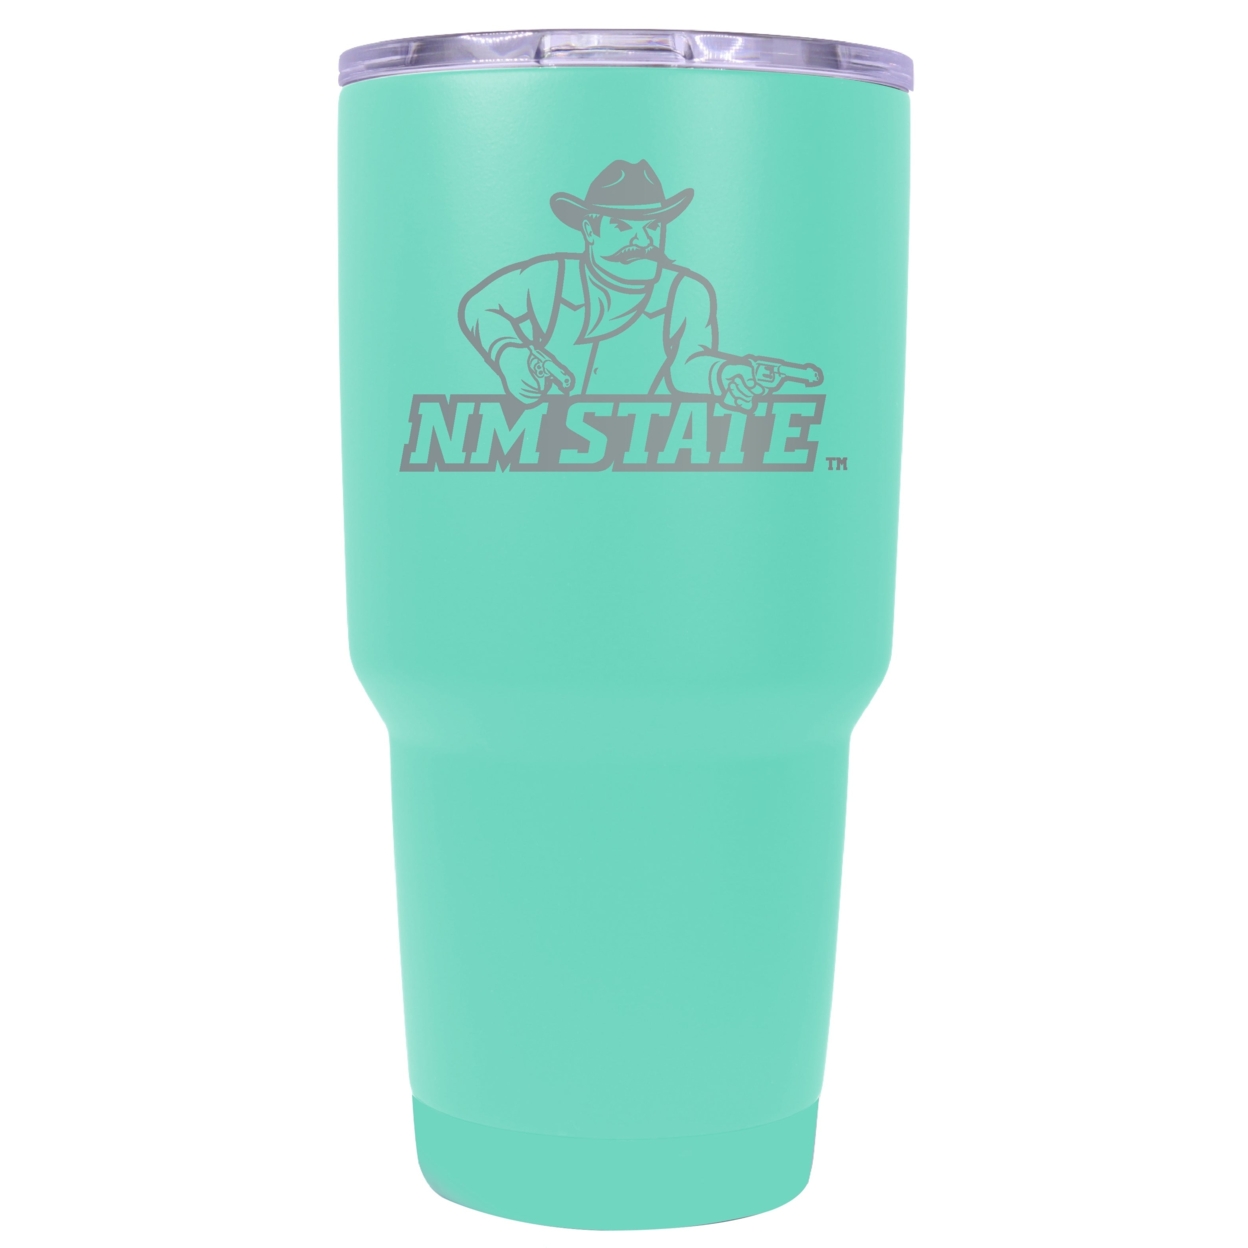 New Mexico State University Pistol Pete 24 Oz Laser Engraved Stainless Steel Insulated Tumbler - Choose Your Color. - Coral